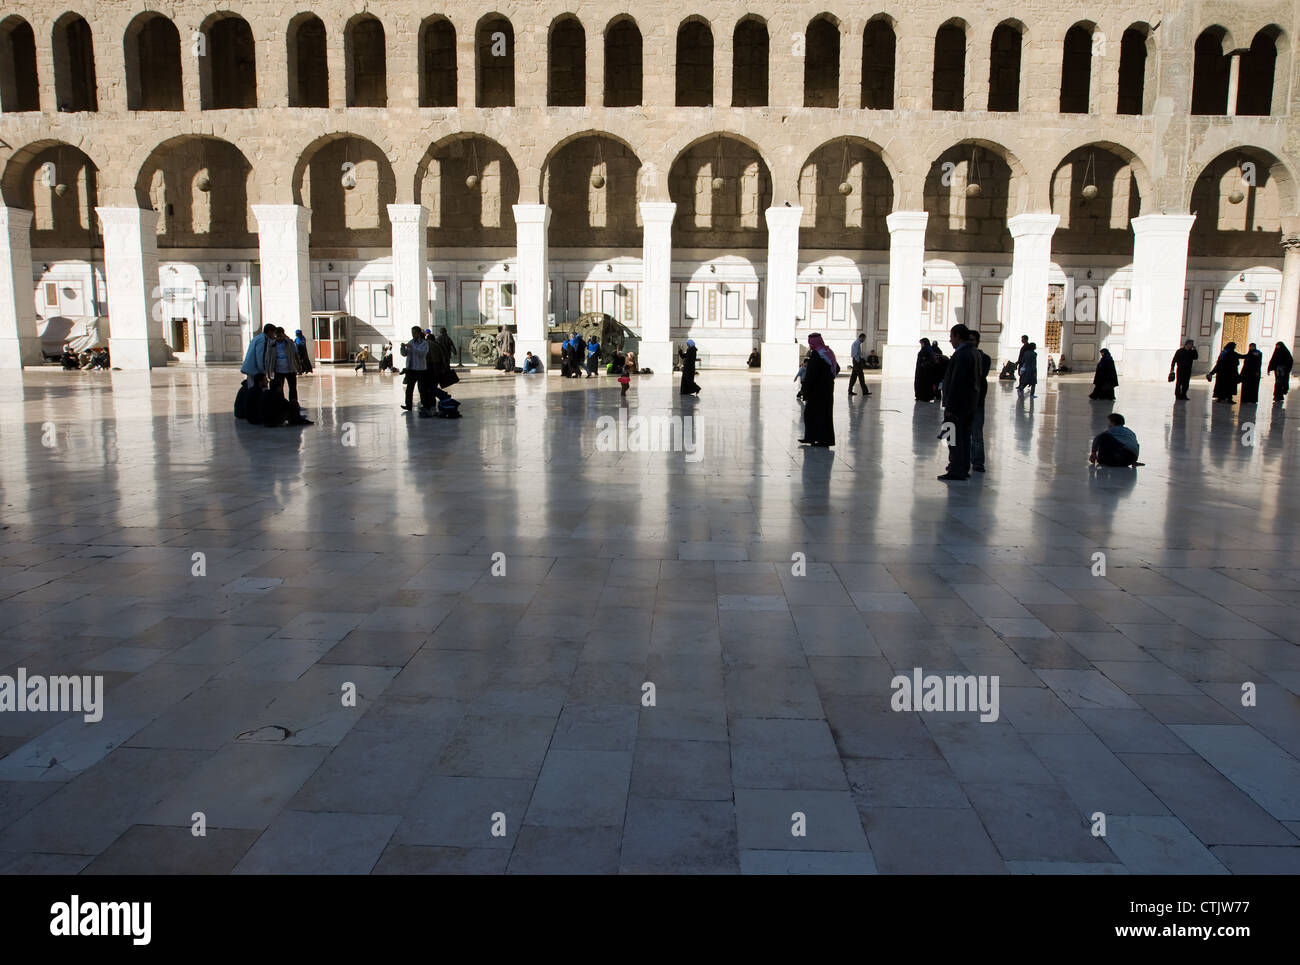 The Umayyad Mosque, the Great Mosque of Damascus, Syria Stock Photo